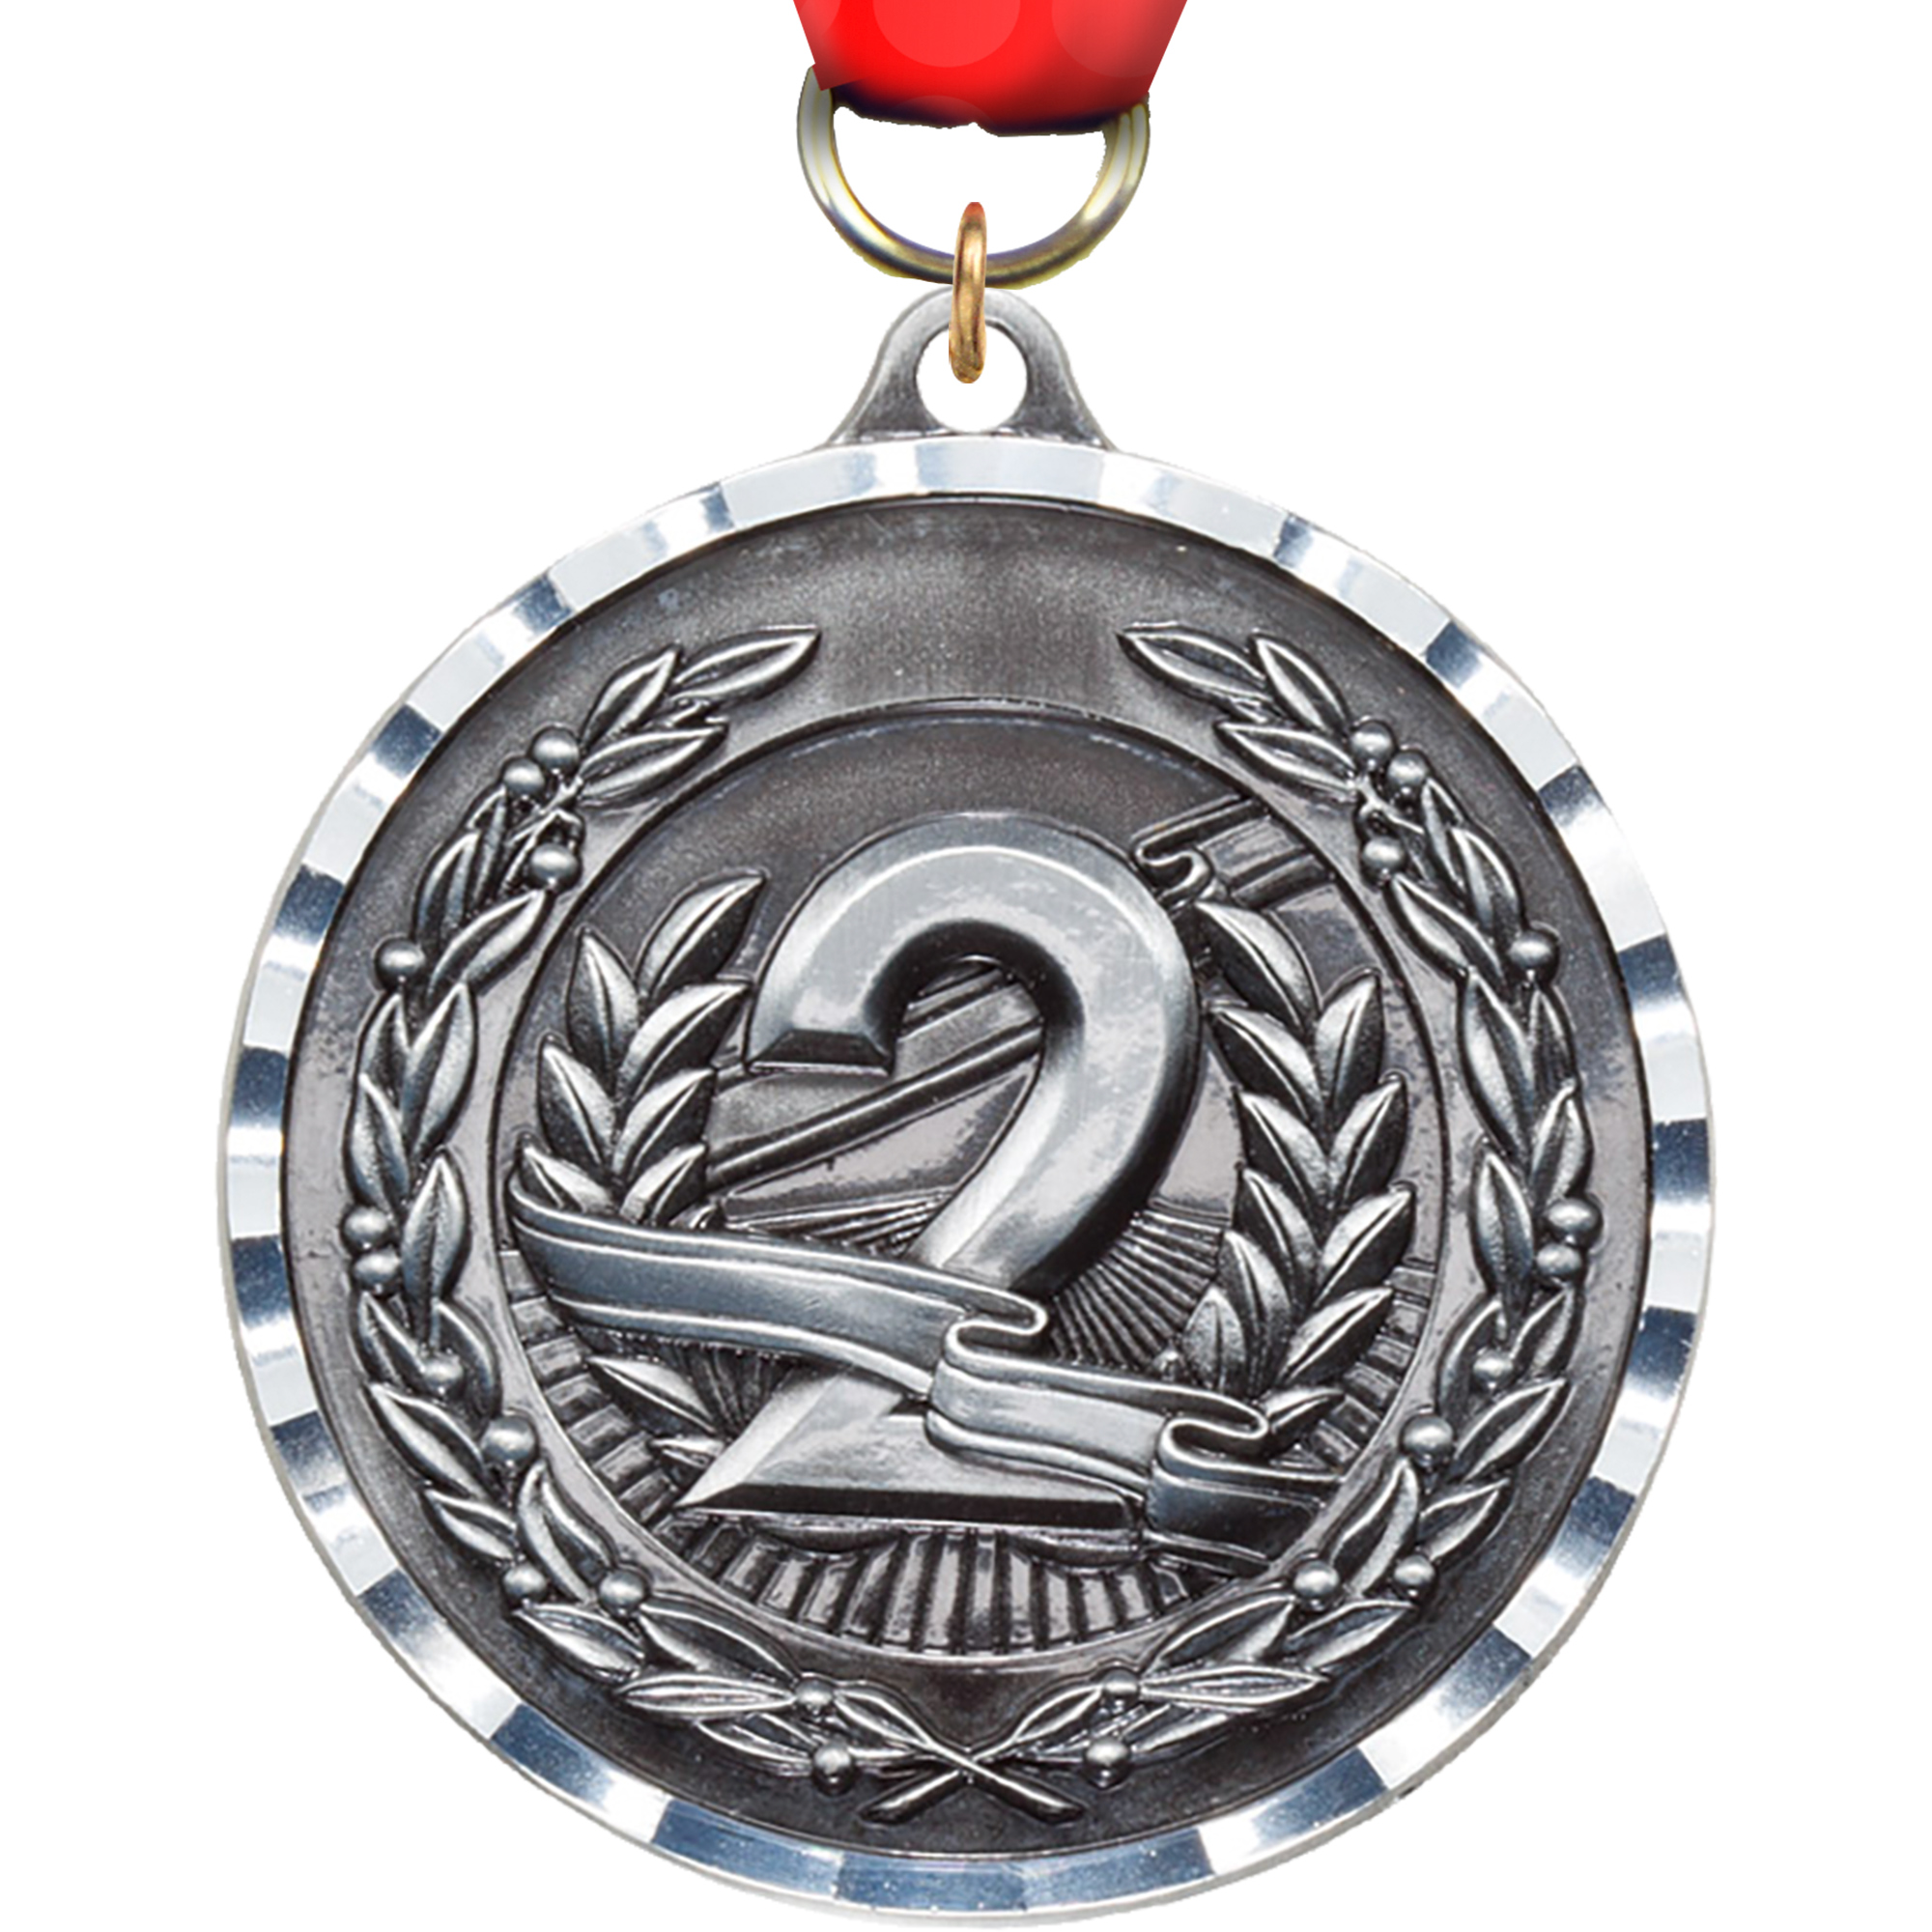 2nd Diecast Medal with Diamond Cut Border- Silver